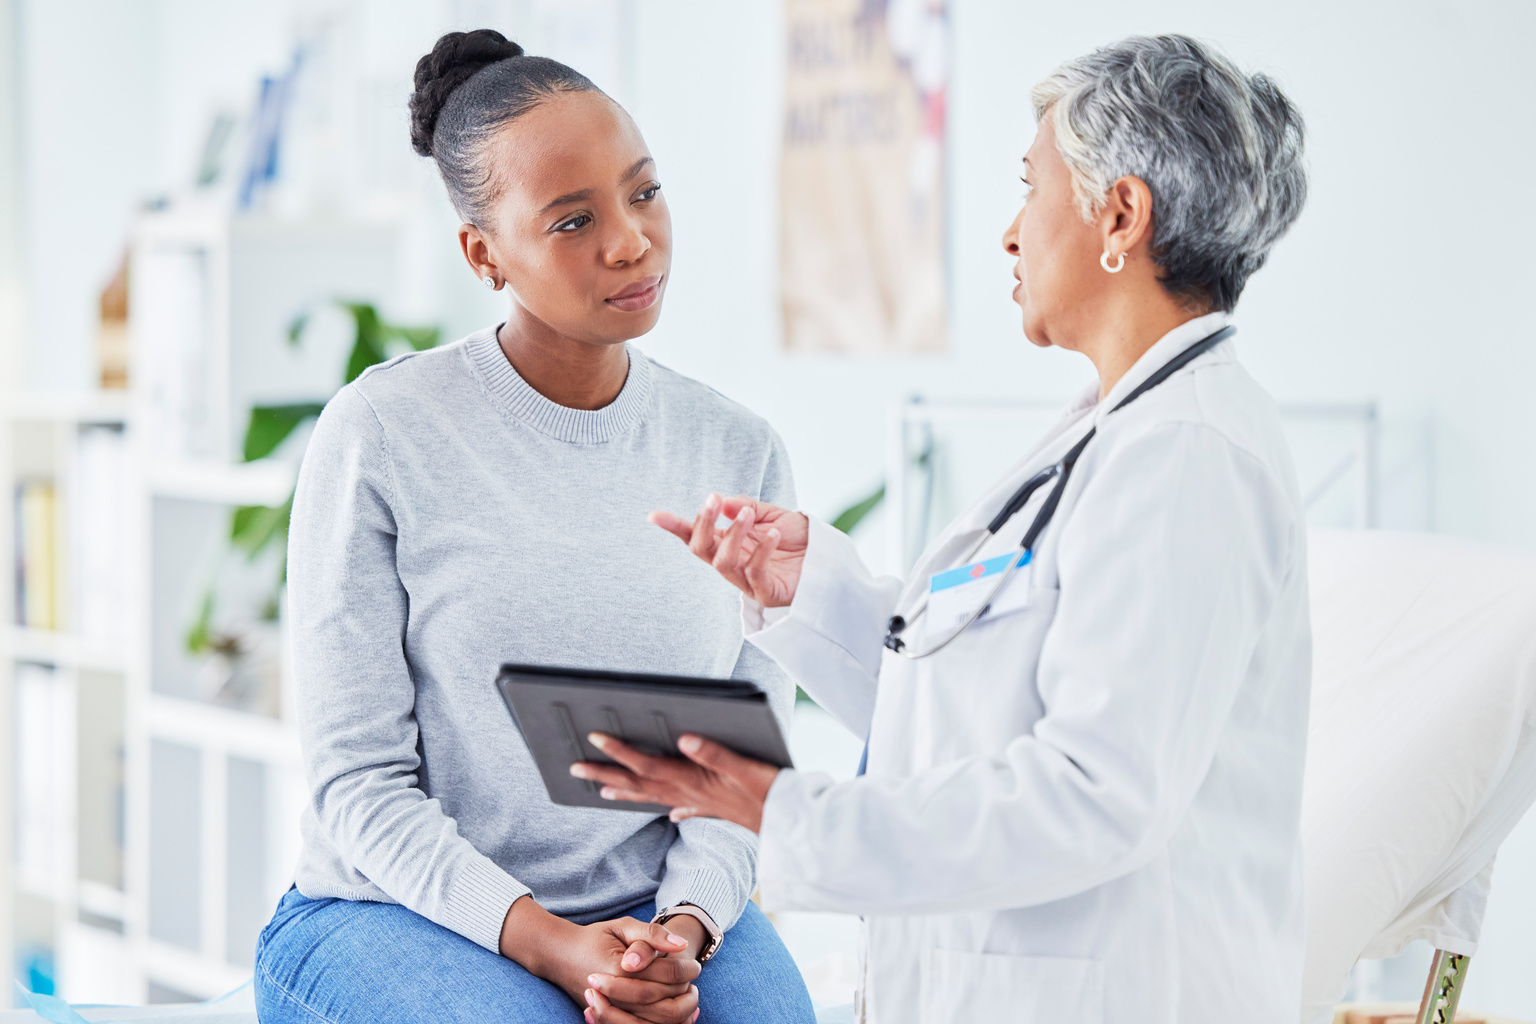 How health leaders can counter minority health disparities with clinical decision support